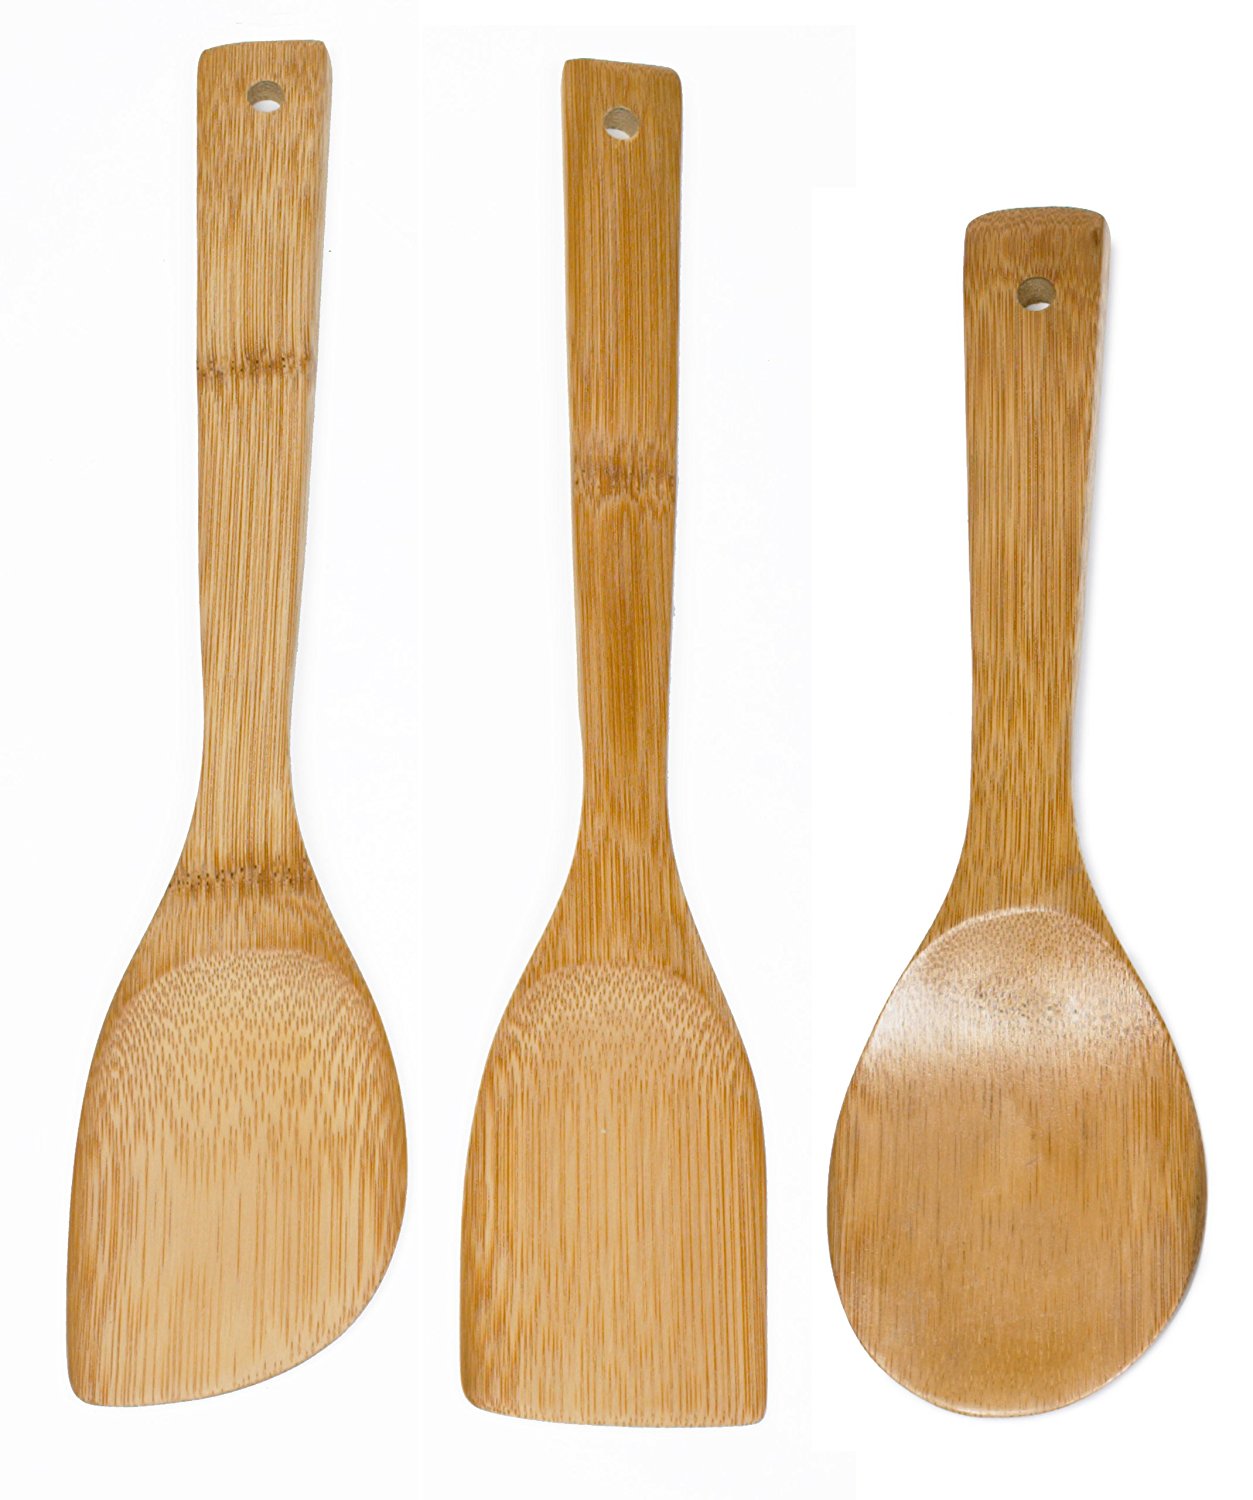 Amazon: Cookware Spoon Set 3 Piece Bamboo Only $3.77!